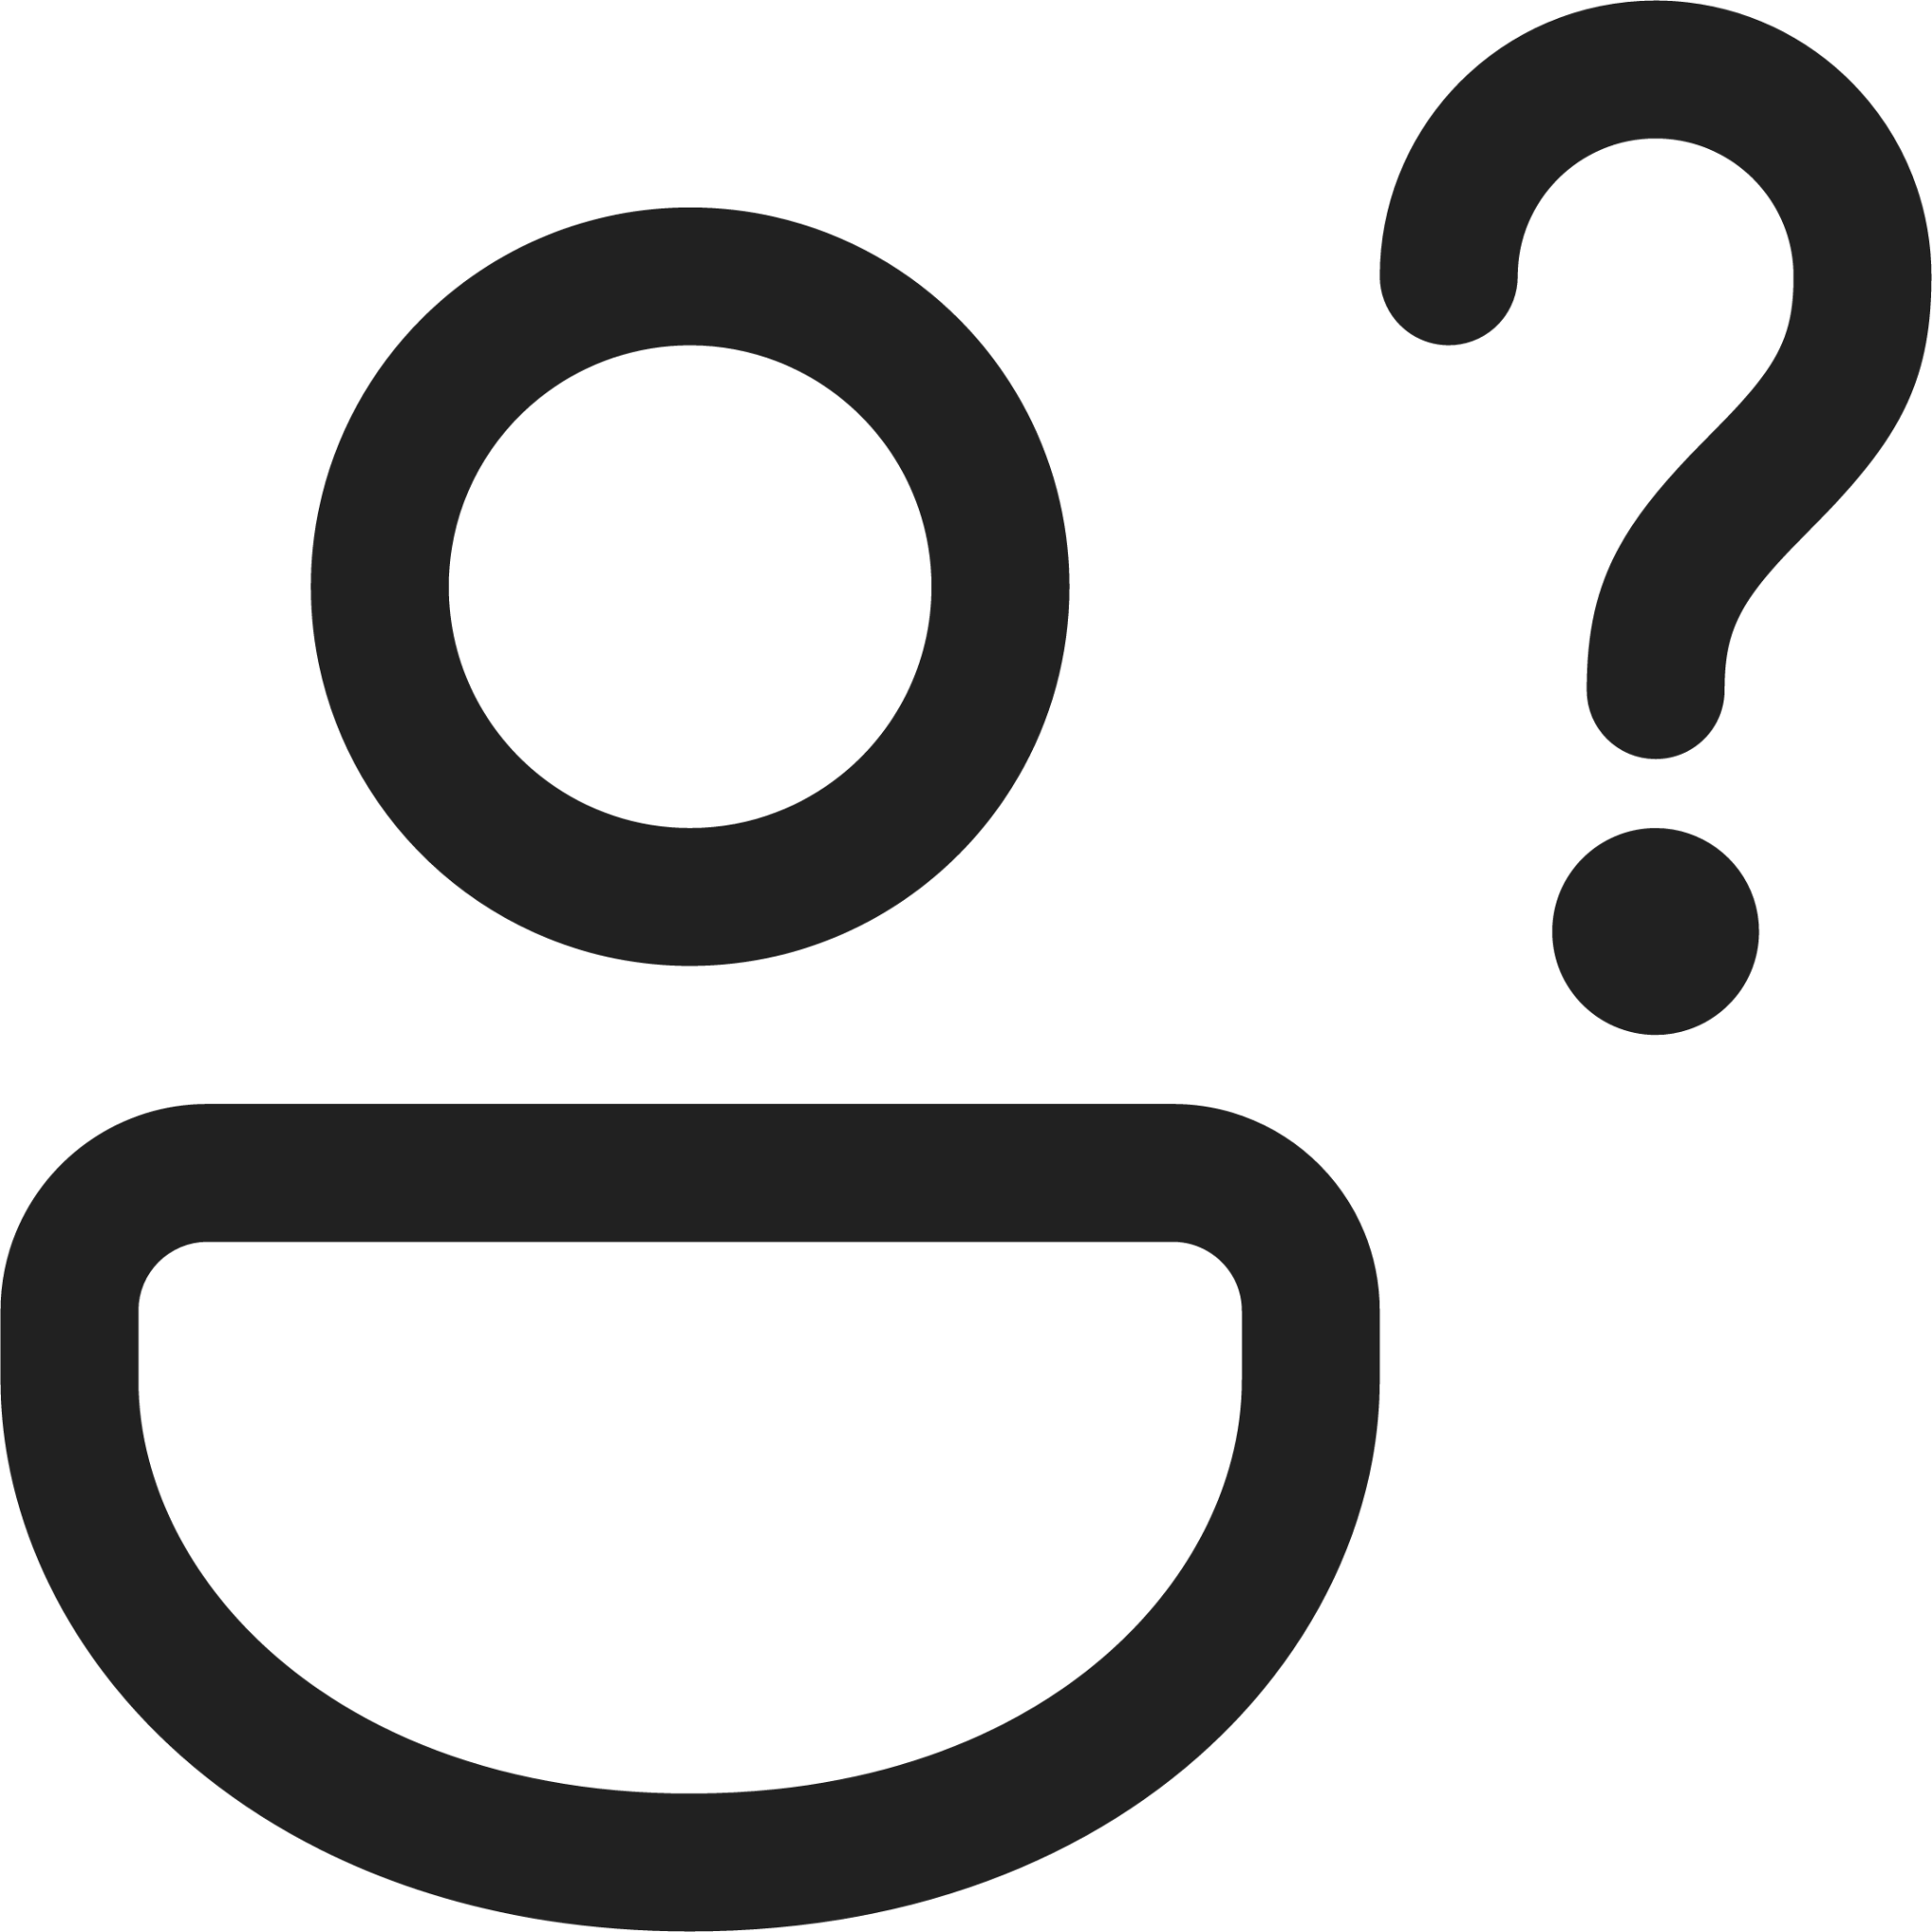 Person Question Mark Icon - Download for free – Iconduck